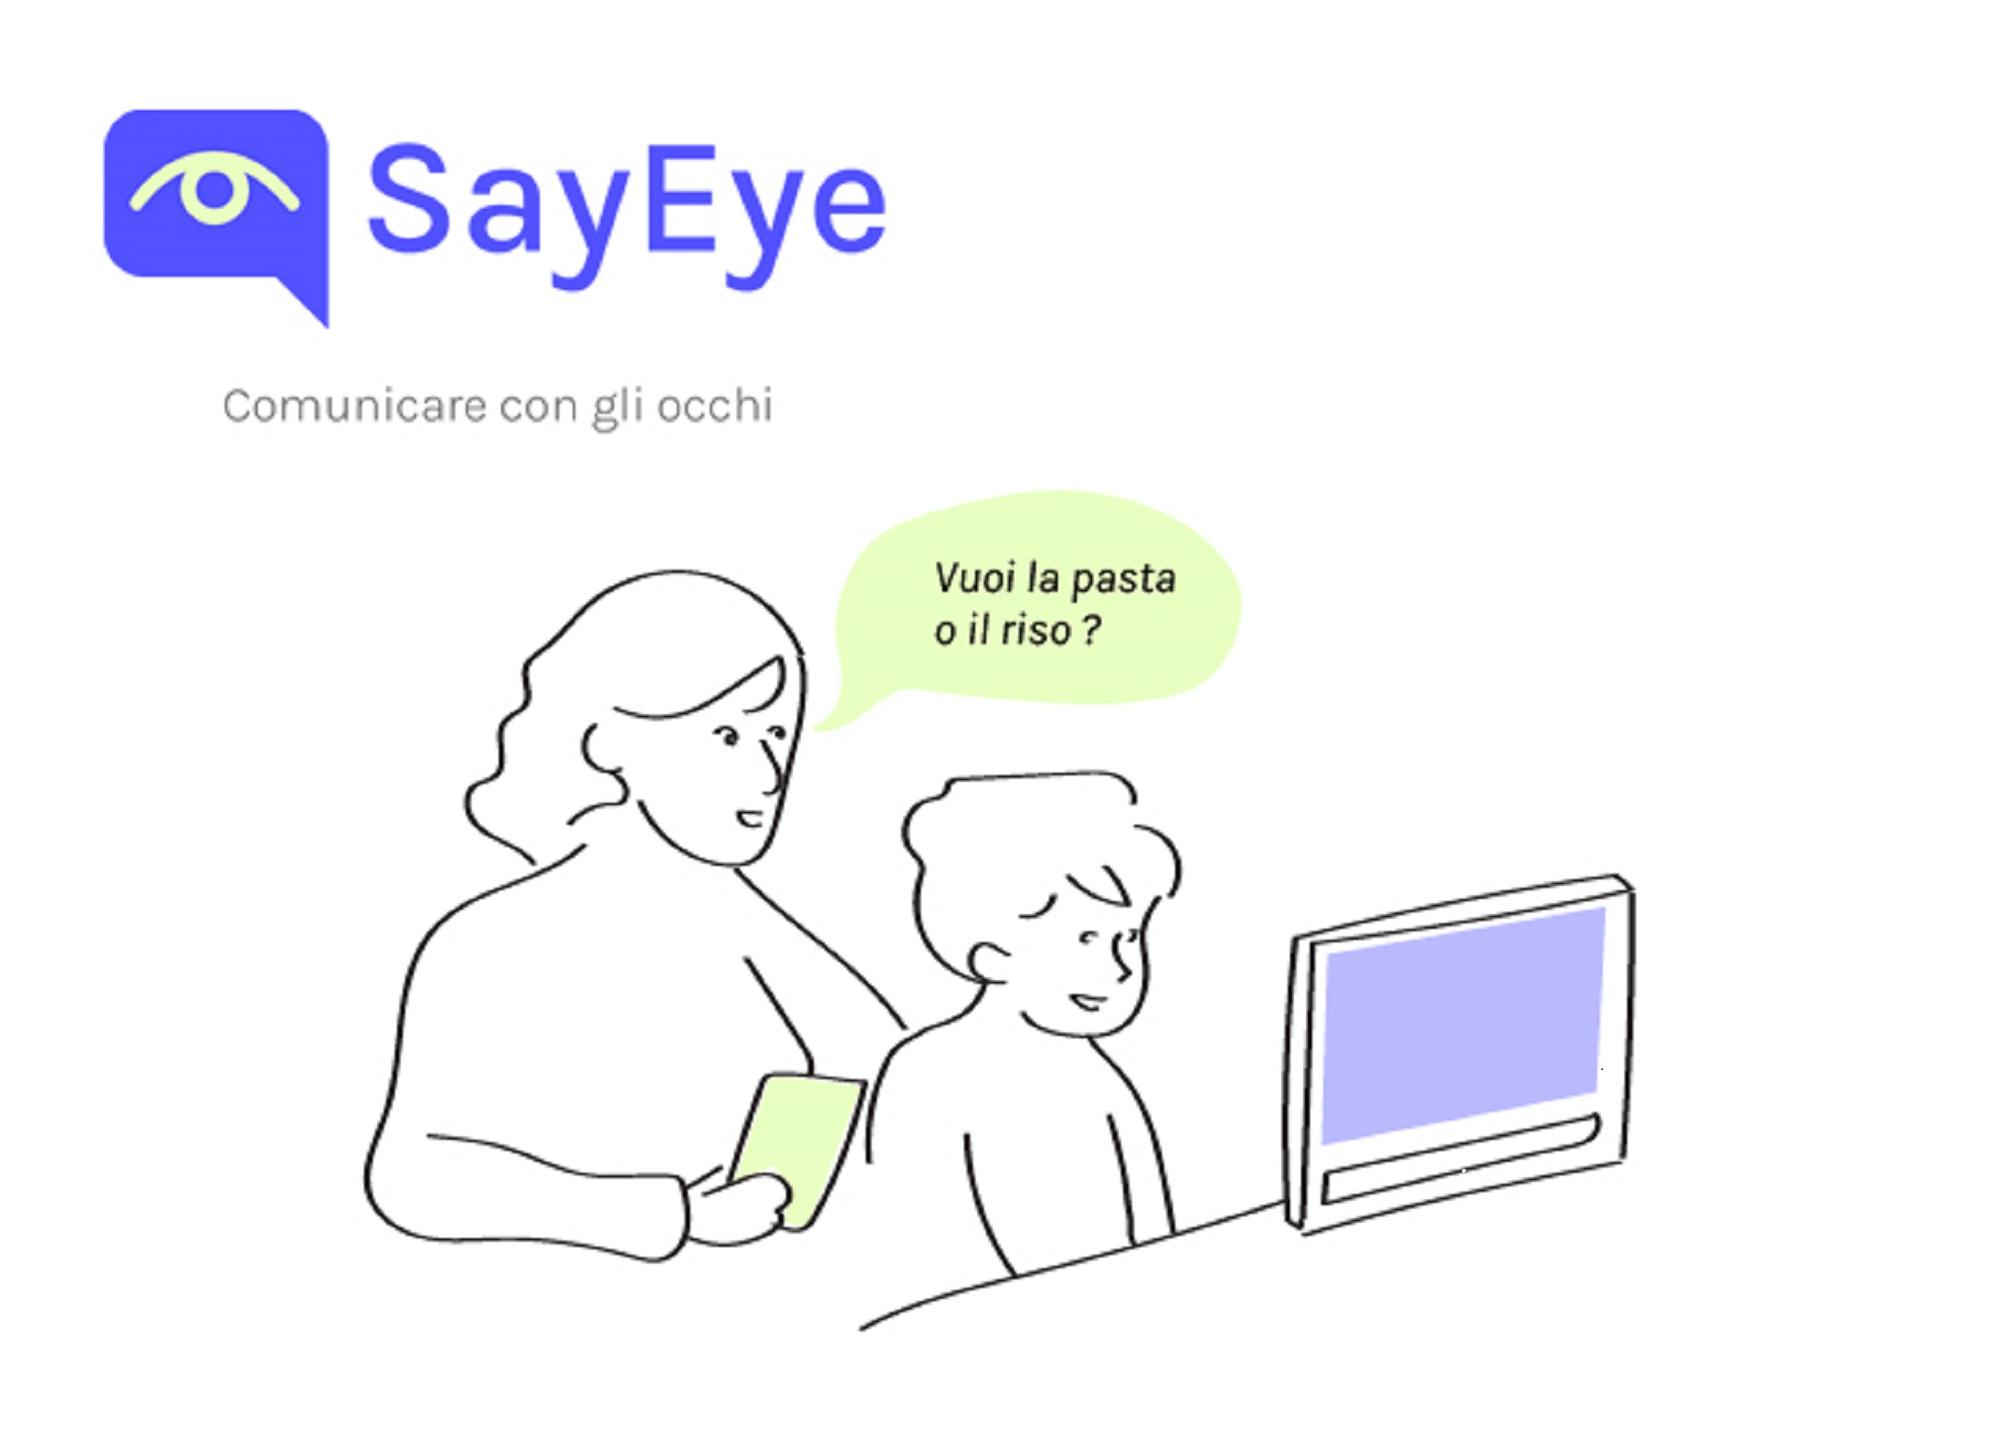 SayEye, software suite to communicate with the eyes